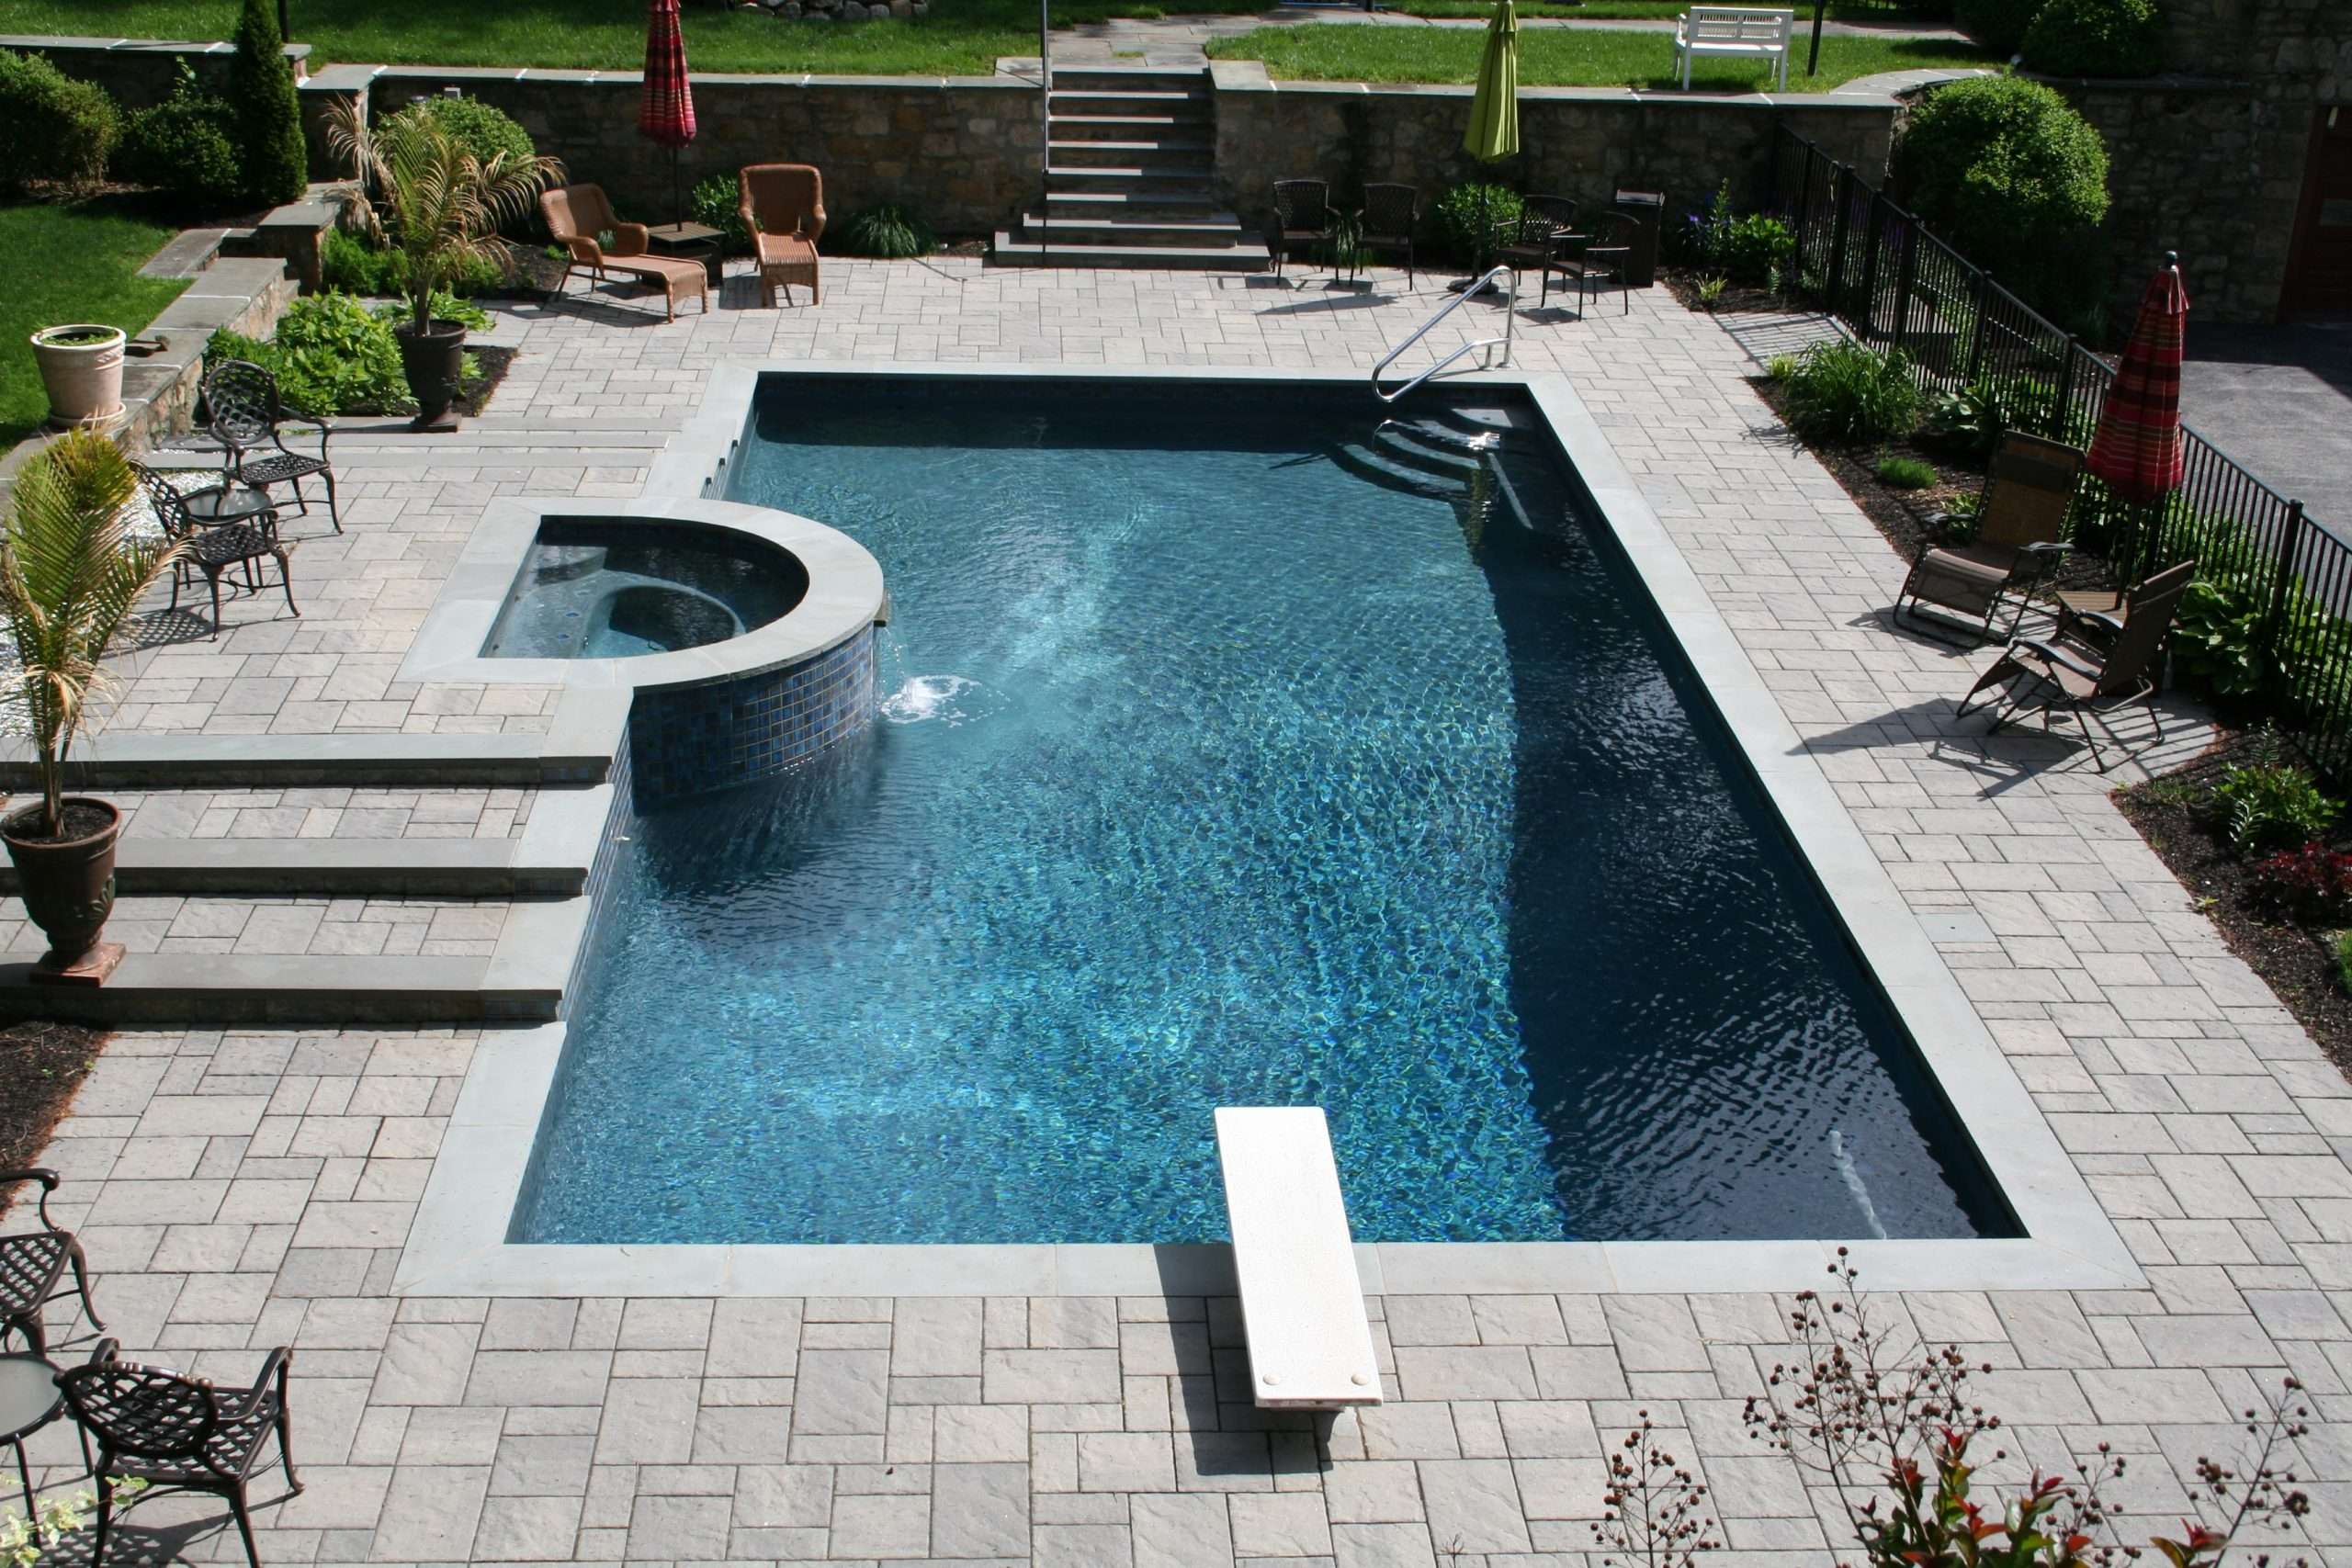 How Much Does An Inground Pool Cost To Install